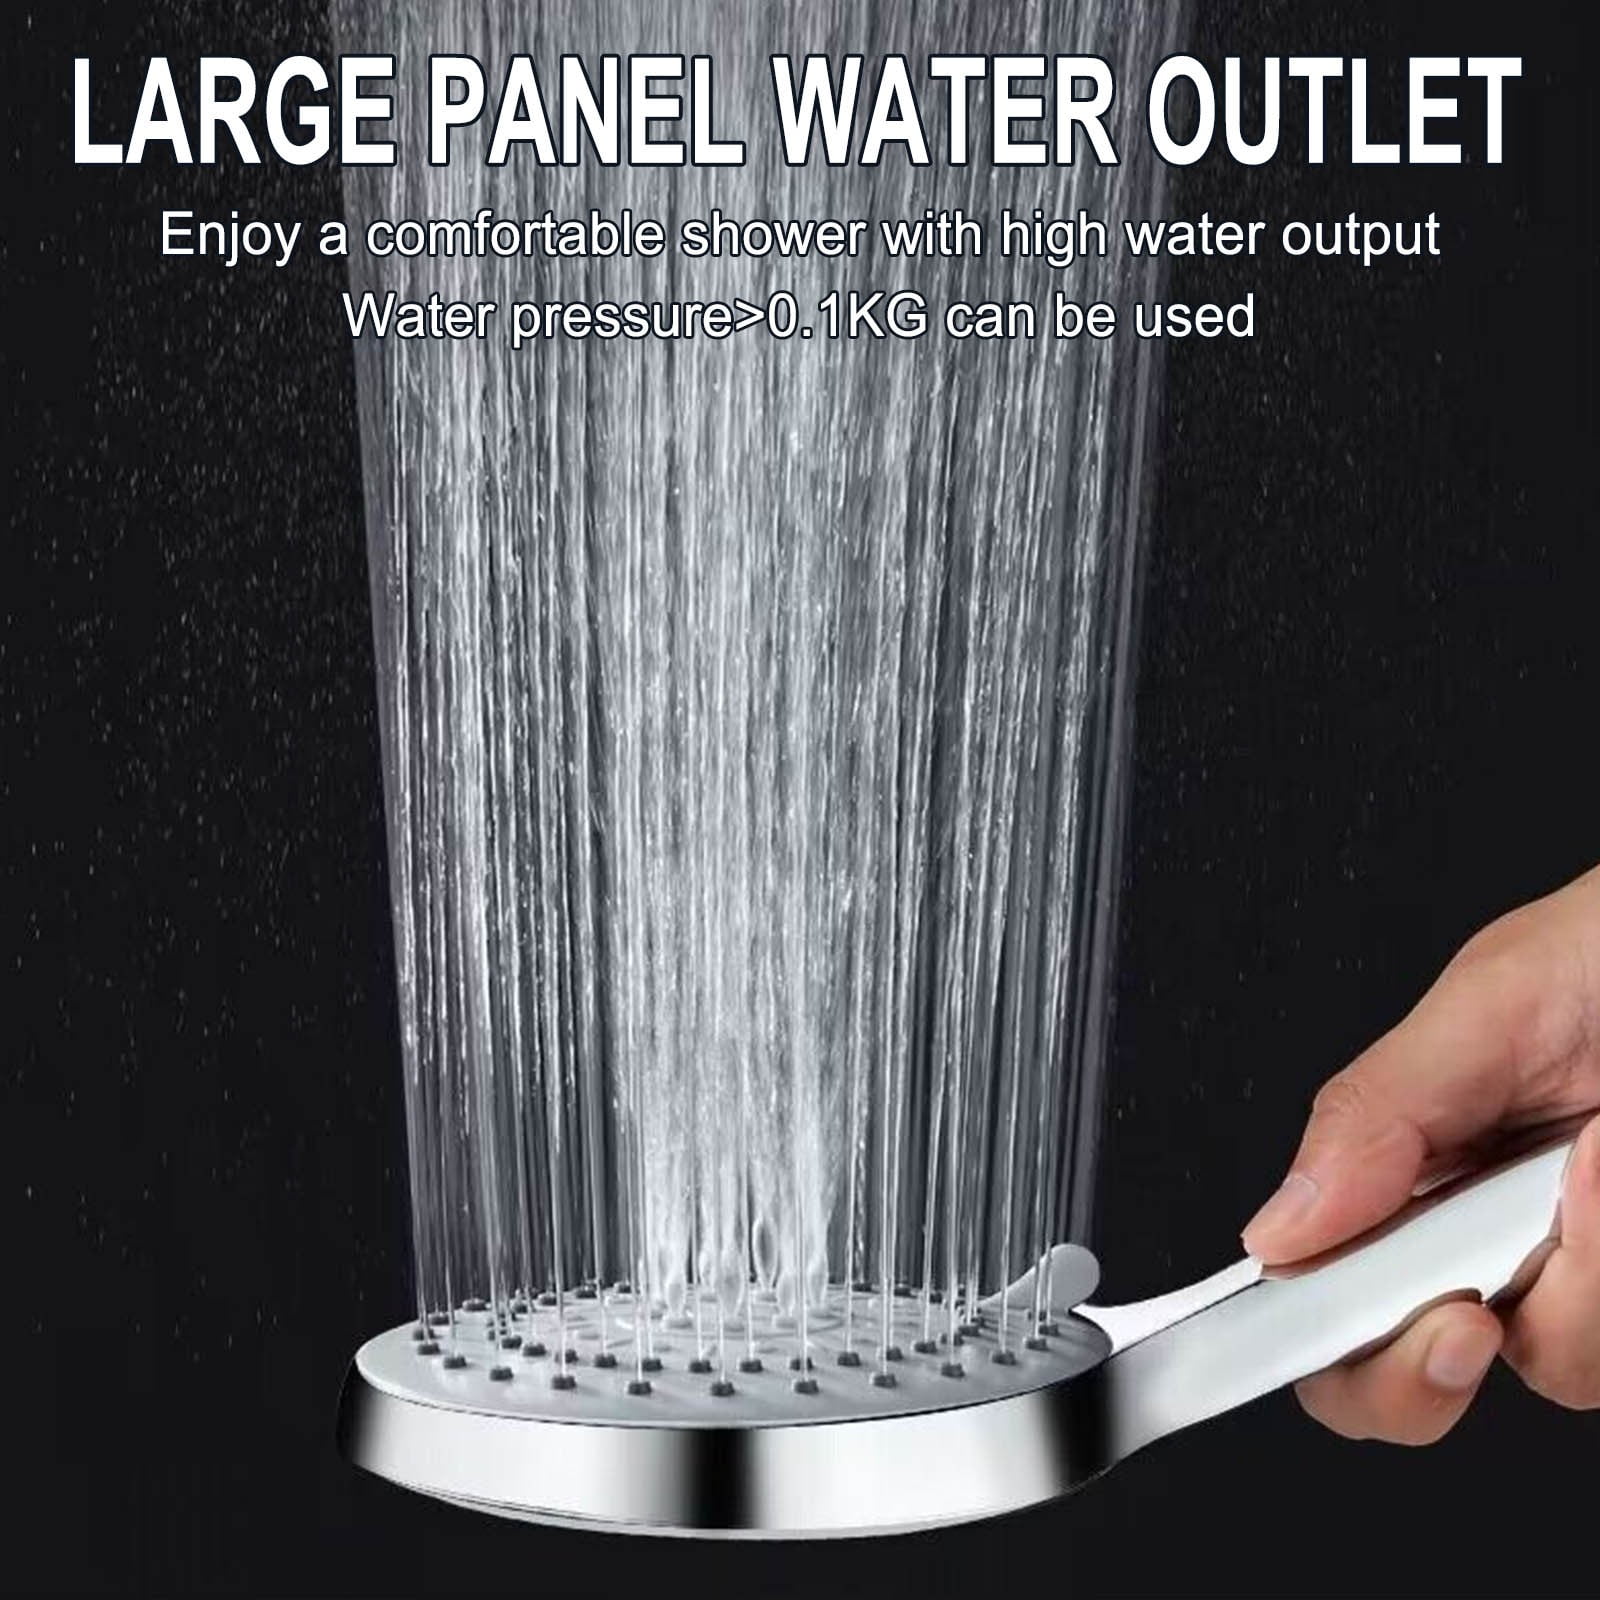 Grip Tight Tools SH501 Jumbo 5 Function Shower Head with Massager & Holder